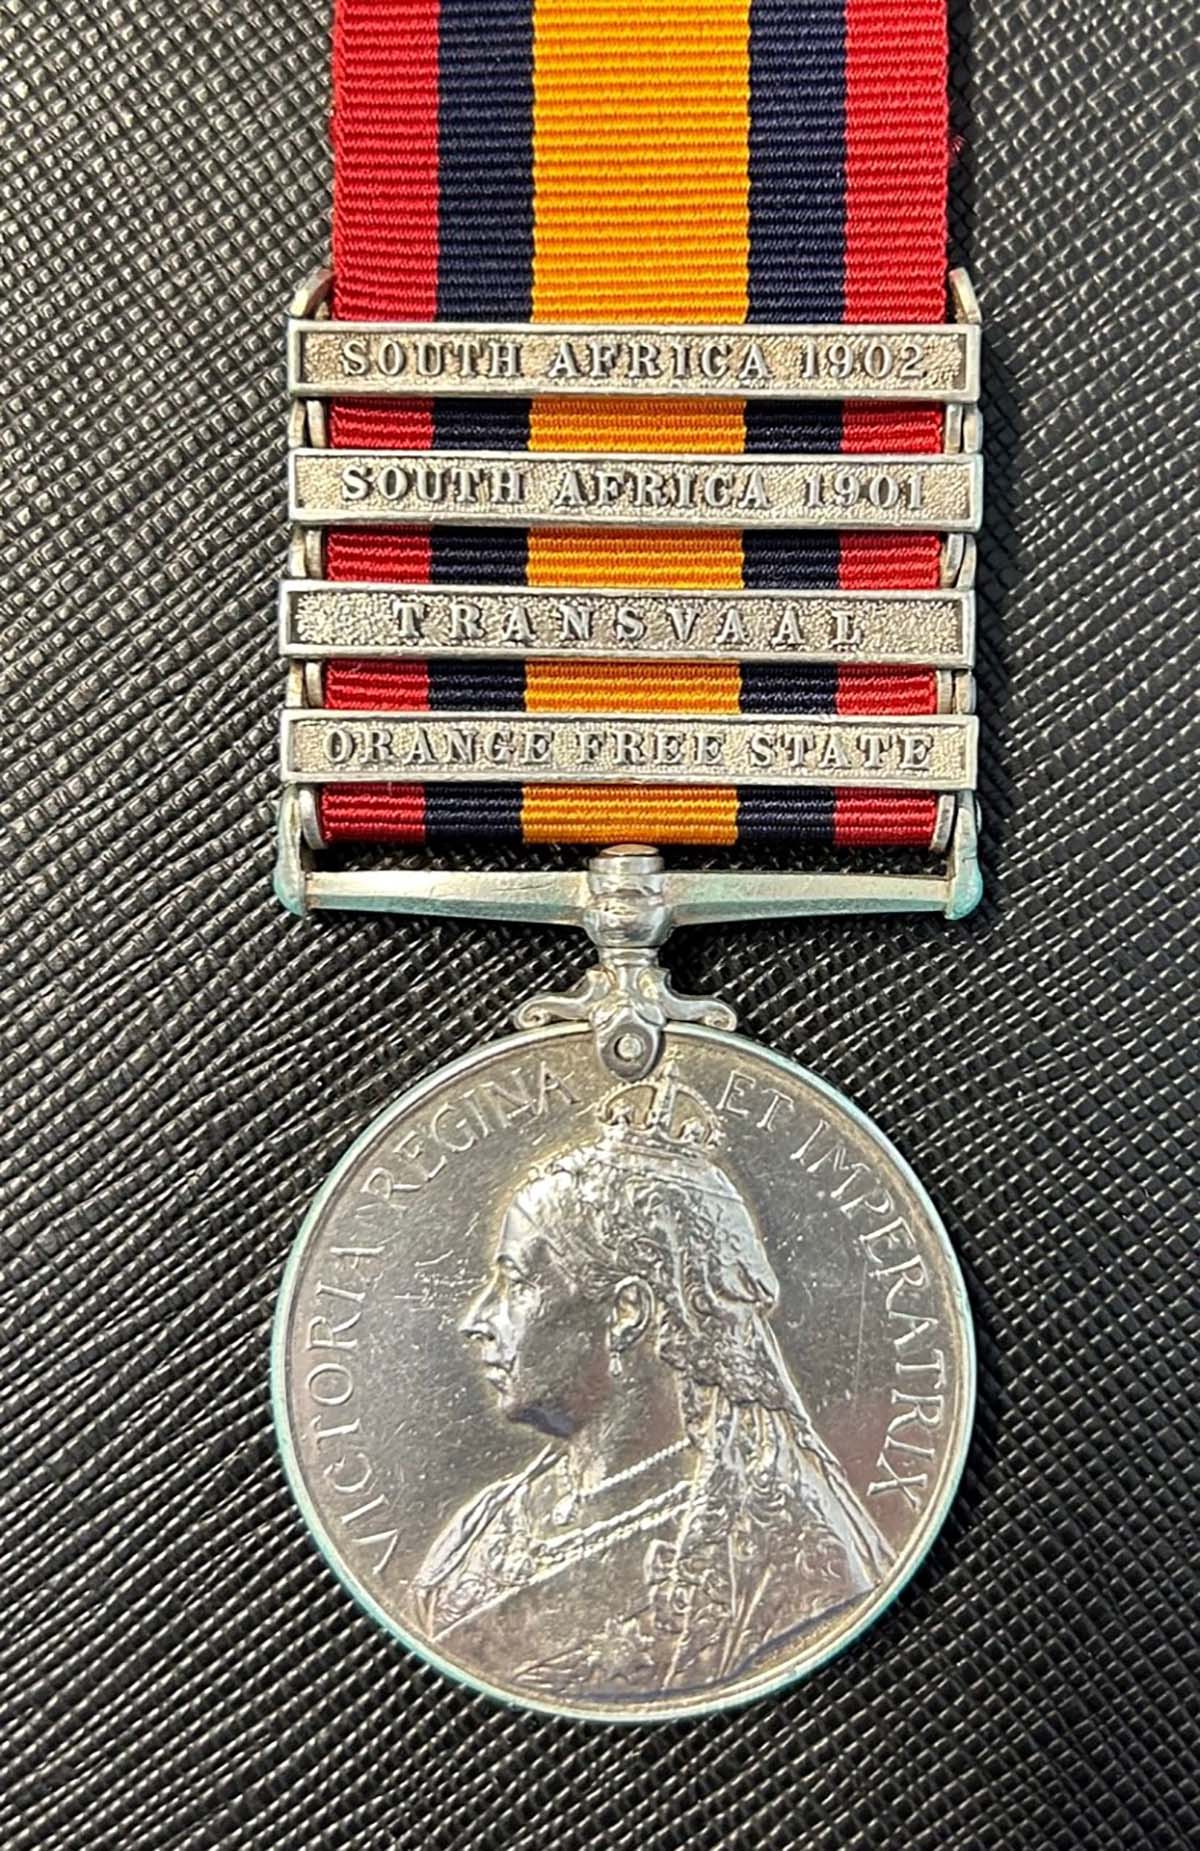 Worcestershire Medal Service: Pte A Nicoll, Royal Highlanders